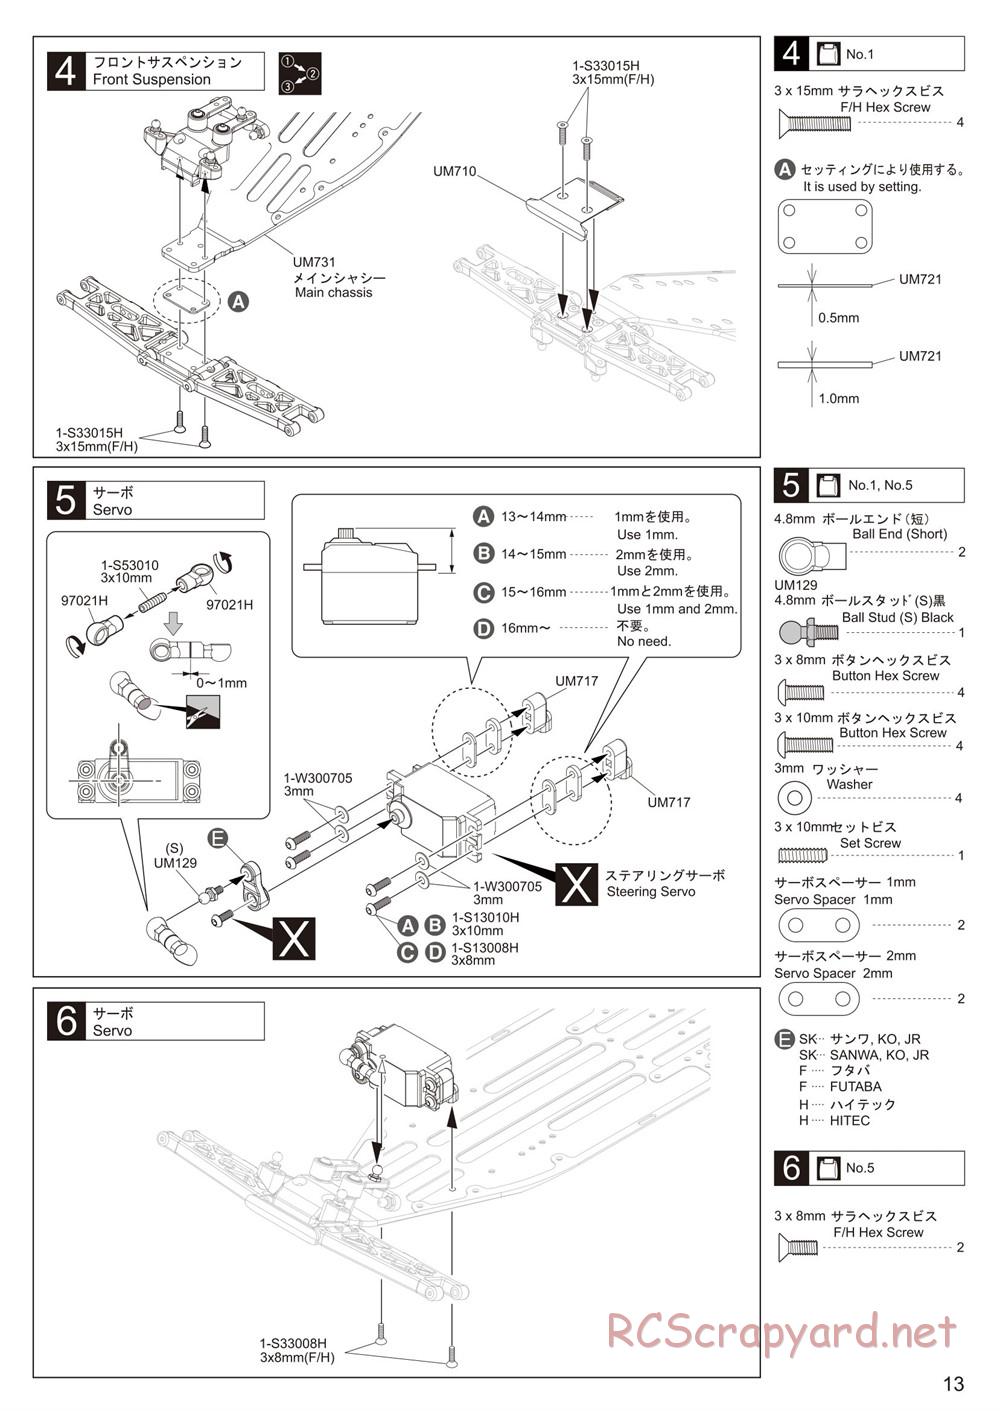 Kyosho - Ultima RB6.6 - Manual - Page 13